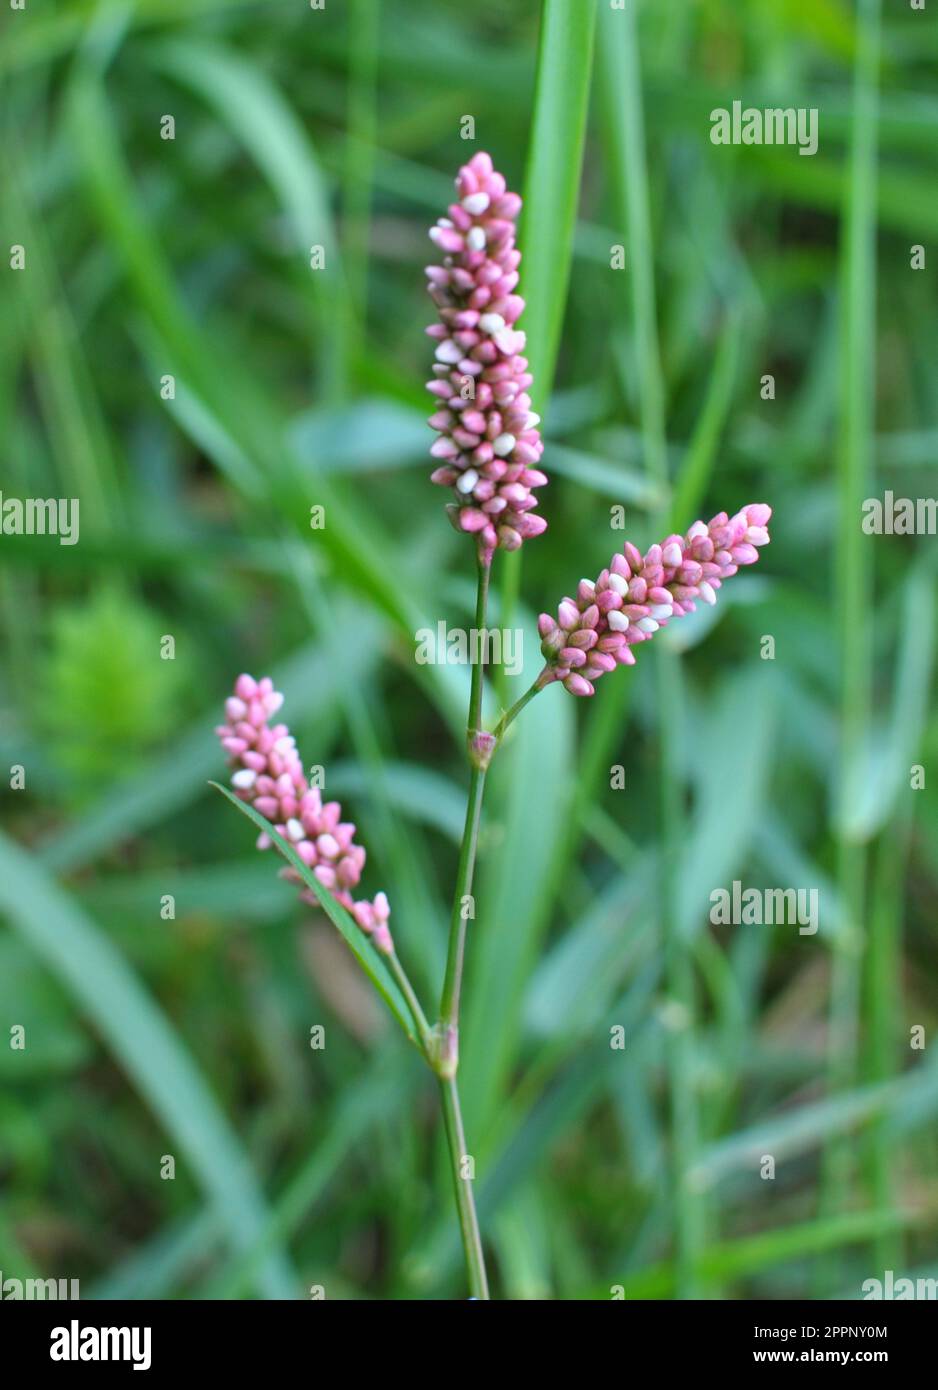 Persicaria maculosa grows among grasses in the wild Stock Photo